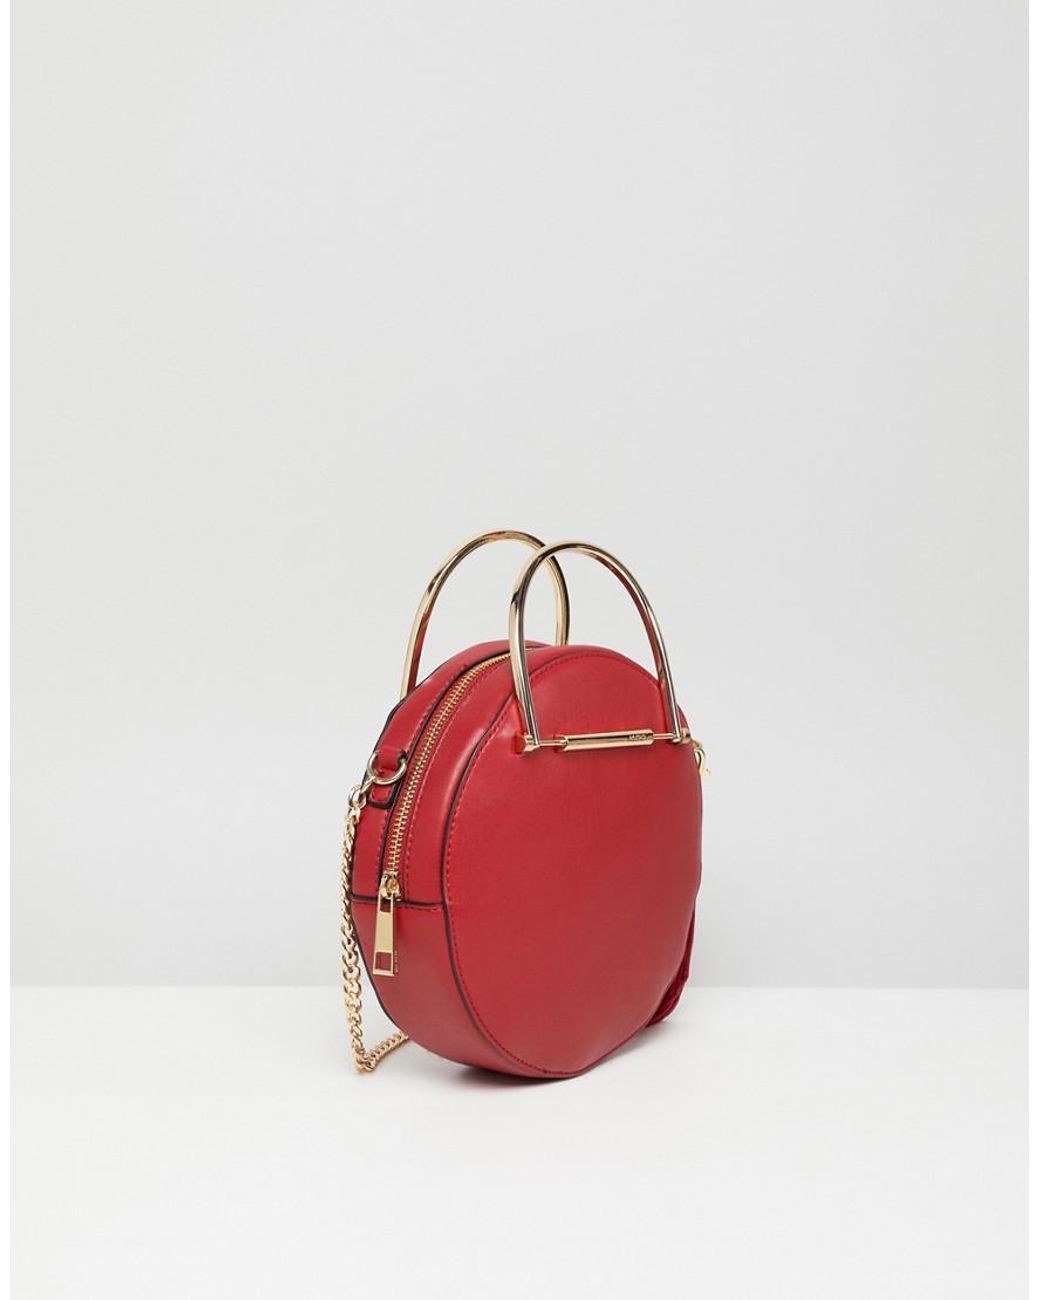 Hilse alkohol Nervesammenbrud ALDO Circle Crossbody Bag With Gold Top Handle In Red | Lyst